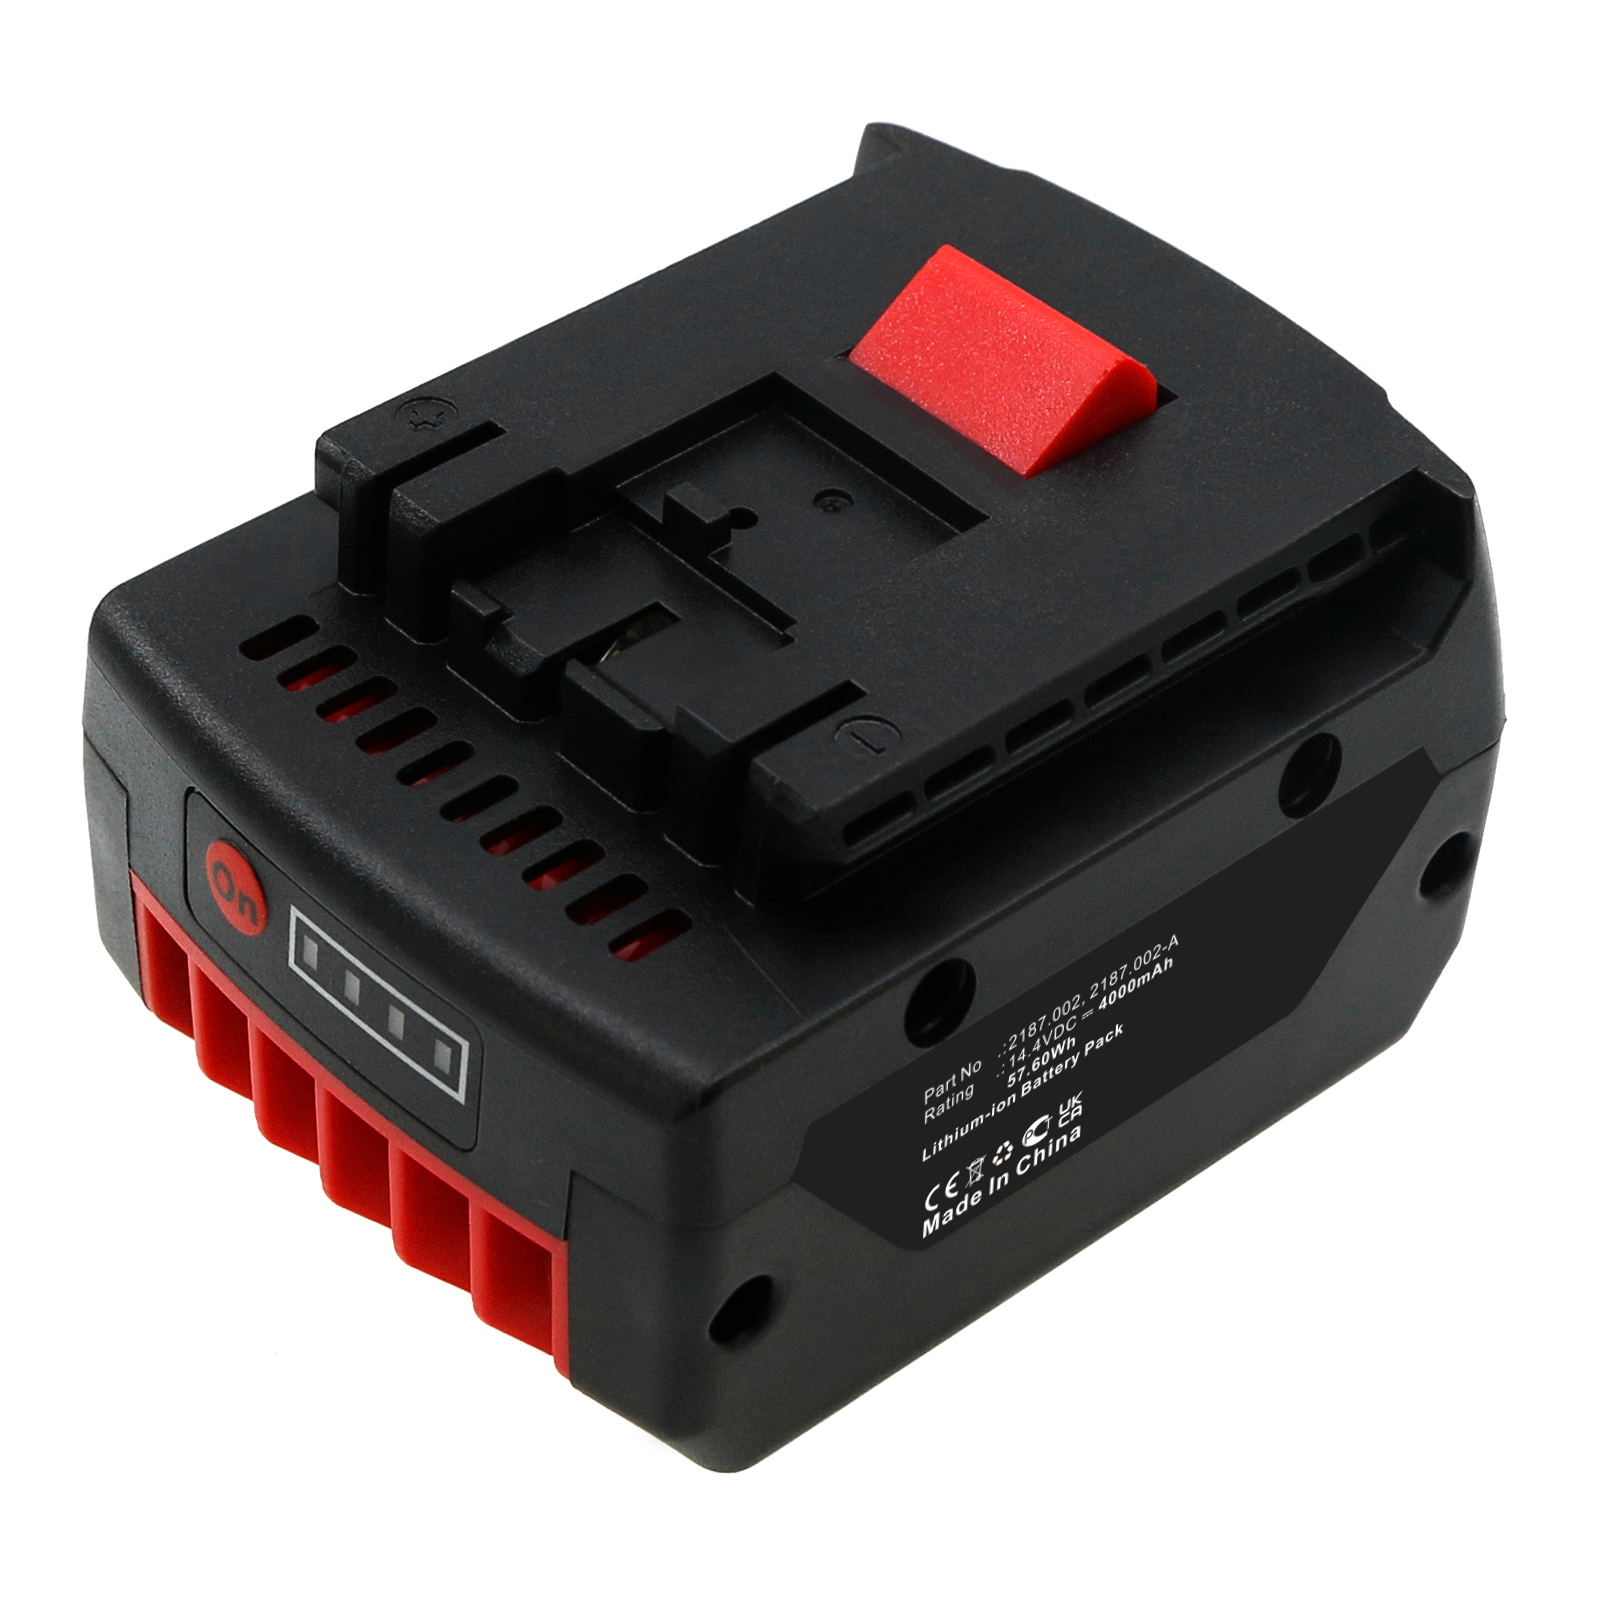 Synergy Digital Strapping Tools Battery, Compatible with ORGAPACK 2187.002 Strapping Tools Battery (Li-ion, 14.4V, 4000mAh)